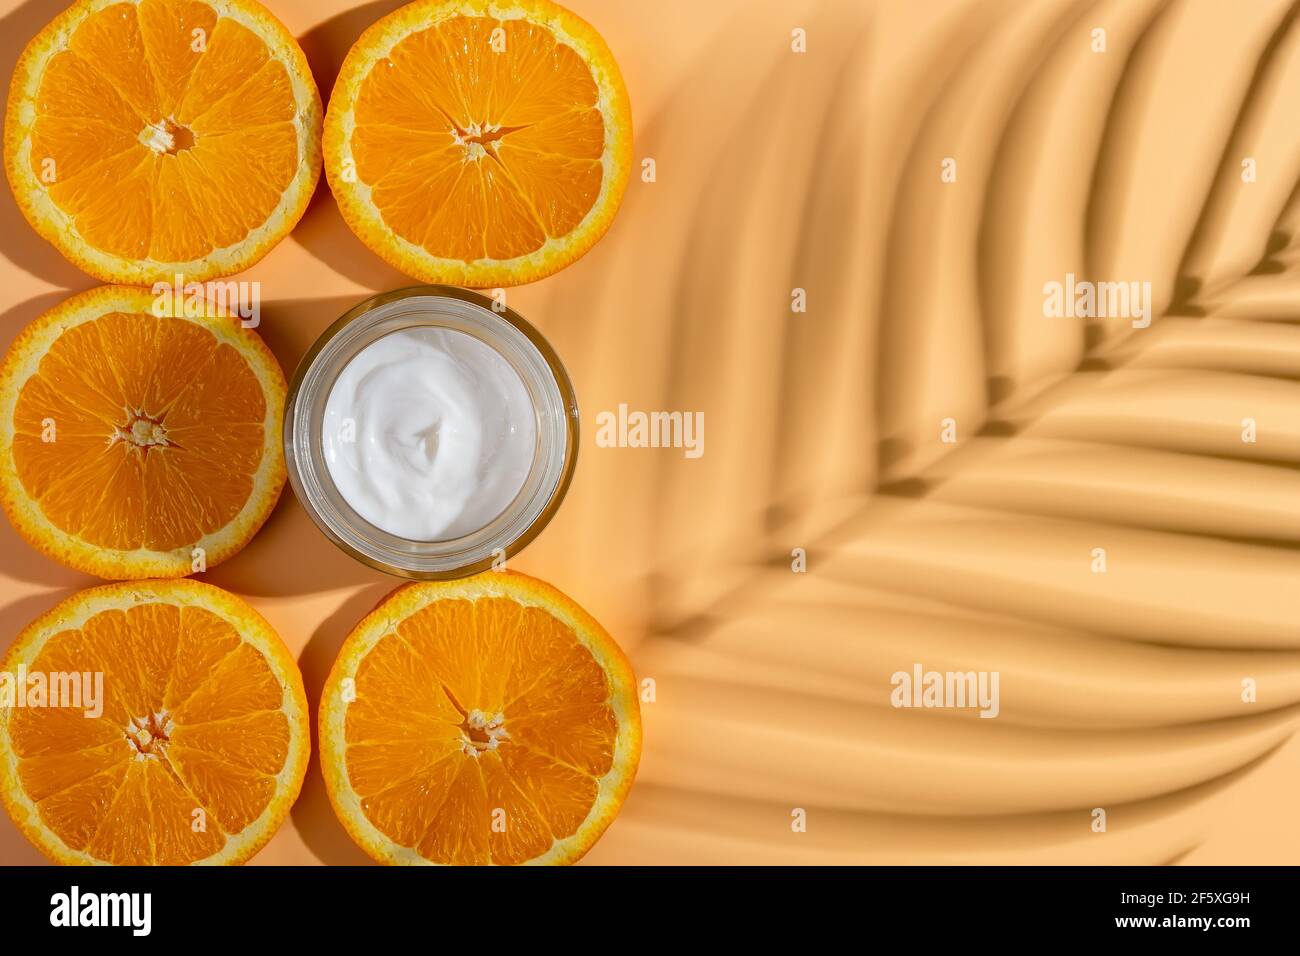 Anti-wrinkle moisturizing face cream and juicy orange slices near blank surface with palm leaf shadow.Glass container of hydrating face cream. Stock Photo